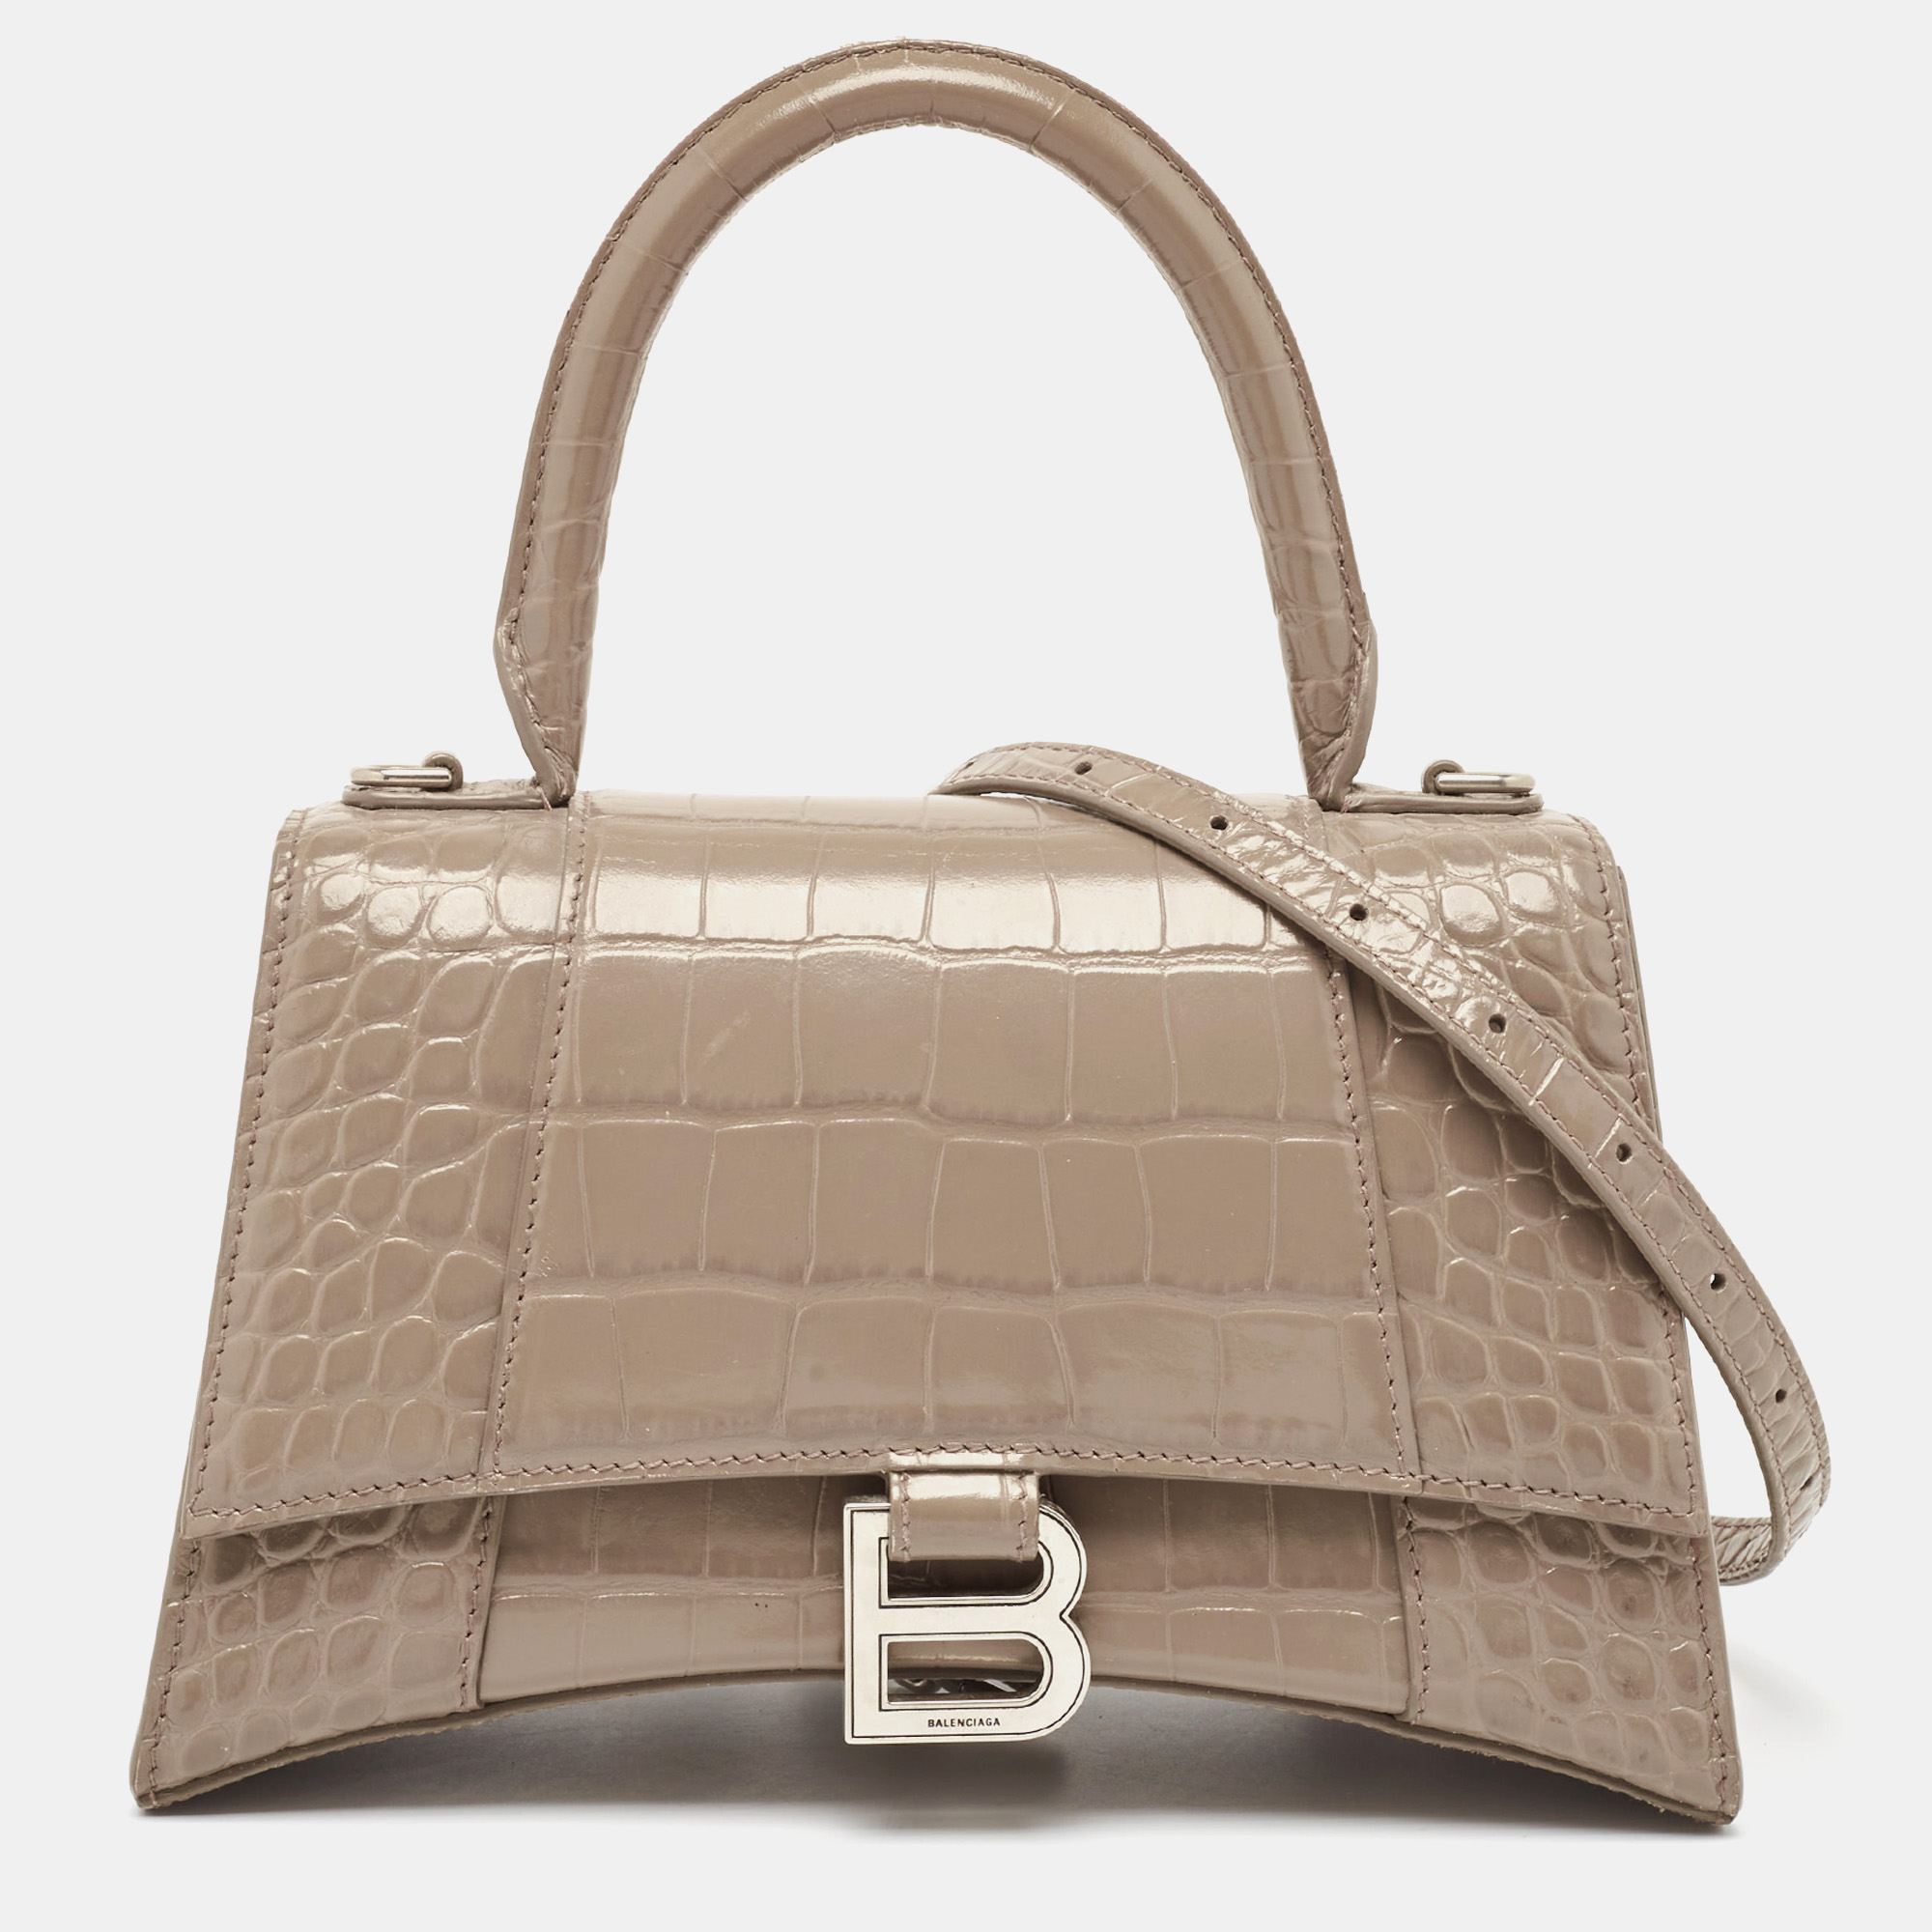 Pre-owned Balenciaga Dark Beige Croc Embossed Leather Small Hourglass Top Handle Bag